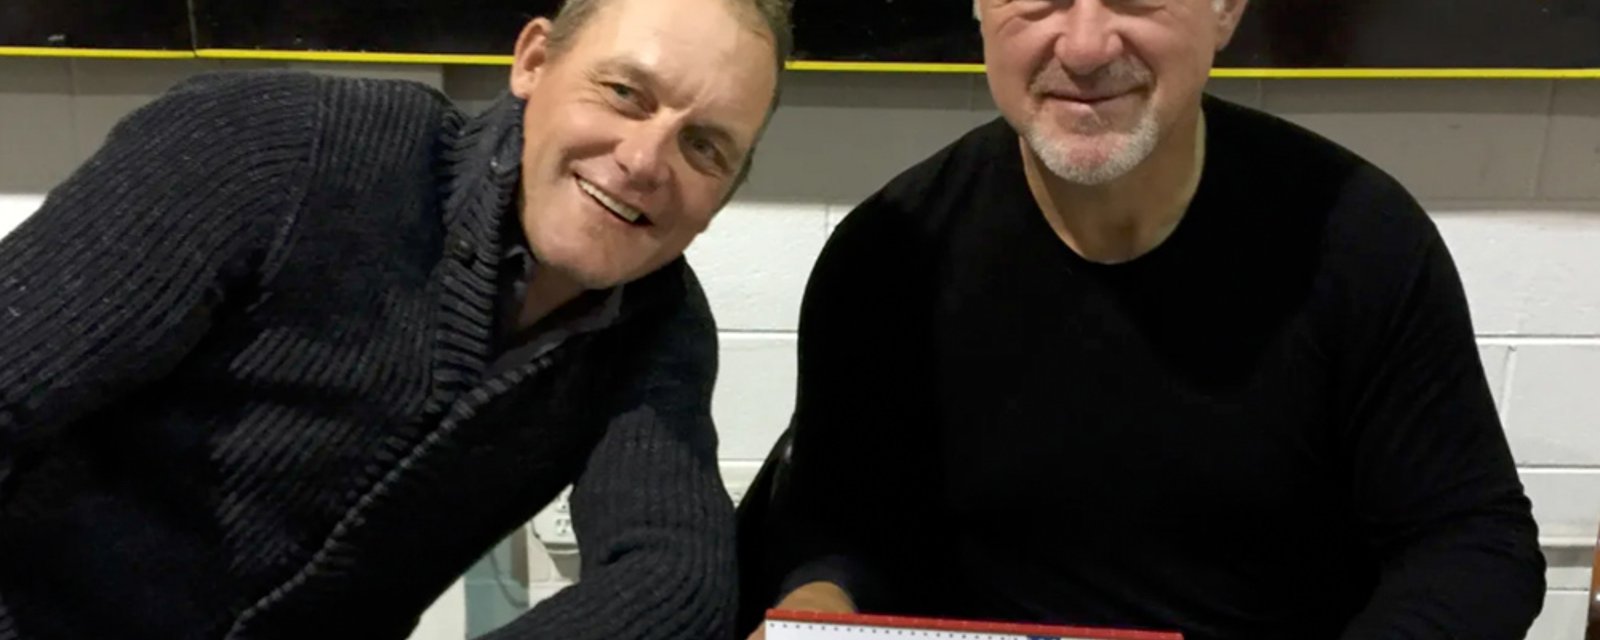 Flashback: Darren McCarty and Claude Lemieux sign autographs together 